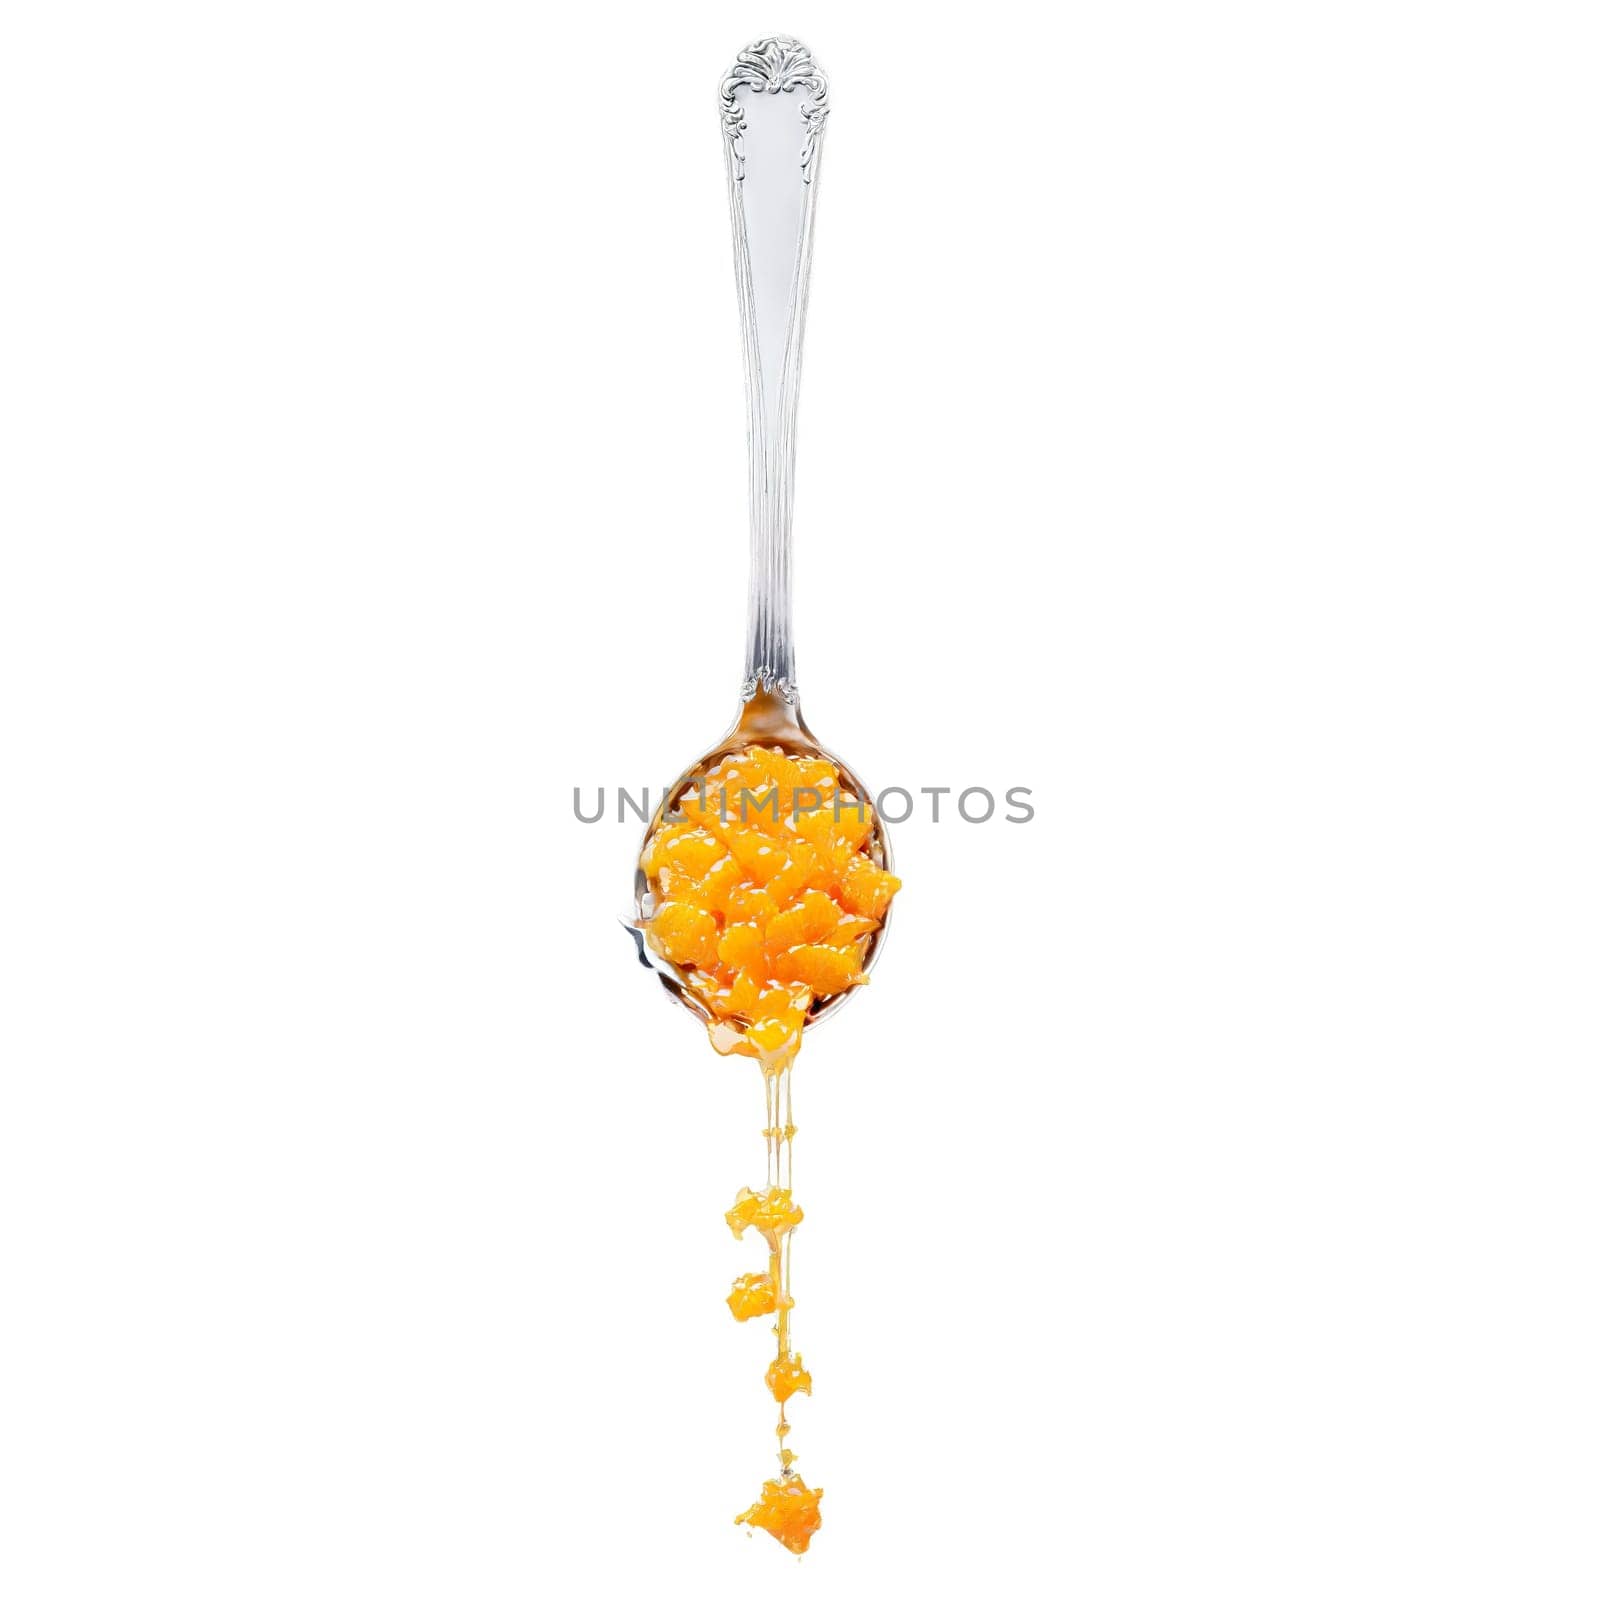 Orange marmalade spread bright and zesty dripping from a tilted spoon with orange peel bits by panophotograph